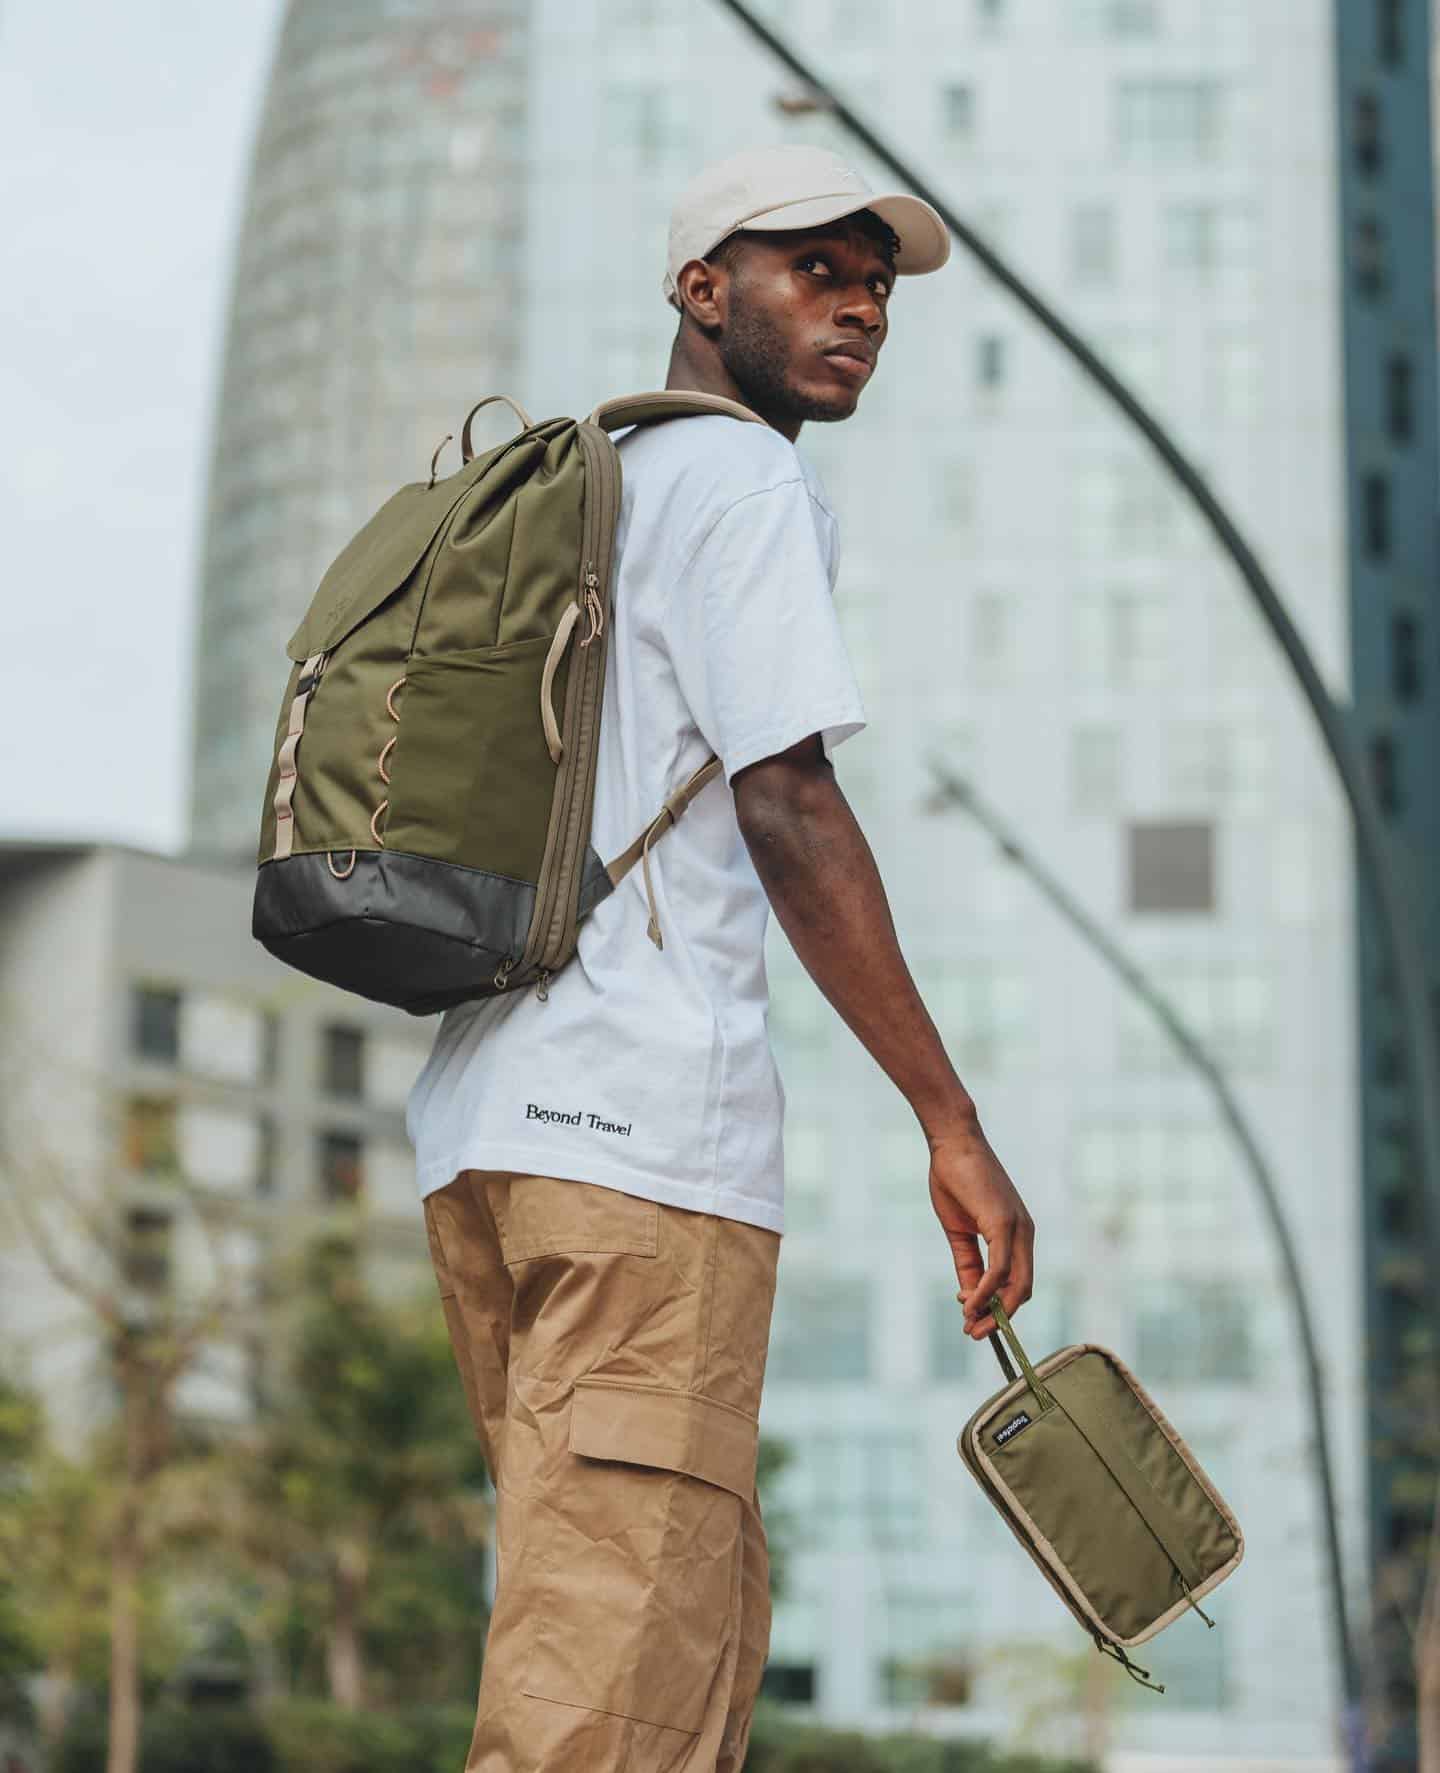 man carrying an olive <a href='https://beauty.nagaexport.com/product/the-green-beauty-guide-your-essential-resource-to-organic-and-natural-skin-care-hair-care-makeup-and-fragrances' target='_blank'>green</a> backpack” width=”1440″ height=”1773″ srcset=”https://www.fashionbeans.com/wp-content/uploads/2023/10/tropicfeel_mancarryinganolivegreenbackpack.jpg 1440w, https://www.fashionbeans.com/wp-content/uploads/2023/10/tropicfeel_mancarryinganolivegreenbackpack-150×185.jpg 150w, https://www.fashionbeans.com/wp-content/uploads/2023/10/tropicfeel_mancarryinganolivegreenbackpack-325×400.jpg 325w, https://www.fashionbeans.com/wp-content/uploads/2023/10/tropicfeel_mancarryinganolivegreenbackpack-768×946.jpg 768w, https://www.fashionbeans.com/wp-content/uploads/2023/10/tropicfeel_mancarryinganolivegreenbackpack-1248×1536.jpg 1248w, https://www.fashionbeans.com/wp-content/uploads/2023/10/tropicfeel_mancarryinganolivegreenbackpack-365×450.jpg 365w, https://www.fashionbeans.com/wp-content/uploads/2023/10/tropicfeel_mancarryinganolivegreenbackpack-300×369.jpg 300w, https://www.fashionbeans.com/wp-content/uploads/2023/10/tropicfeel_mancarryinganolivegreenbackpack-324×400.jpg 324w, https://www.fashionbeans.com/wp-content/uploads/2023/10/tropicfeel_mancarryinganolivegreenbackpack-696×857.jpg 696w, https://www.fashionbeans.com/wp-content/uploads/2023/10/tropicfeel_mancarryinganolivegreenbackpack-1068×1315.jpg 1068w” sizes=”(max-width: 1440px) 100vw, 1440px”/><figcaption id=